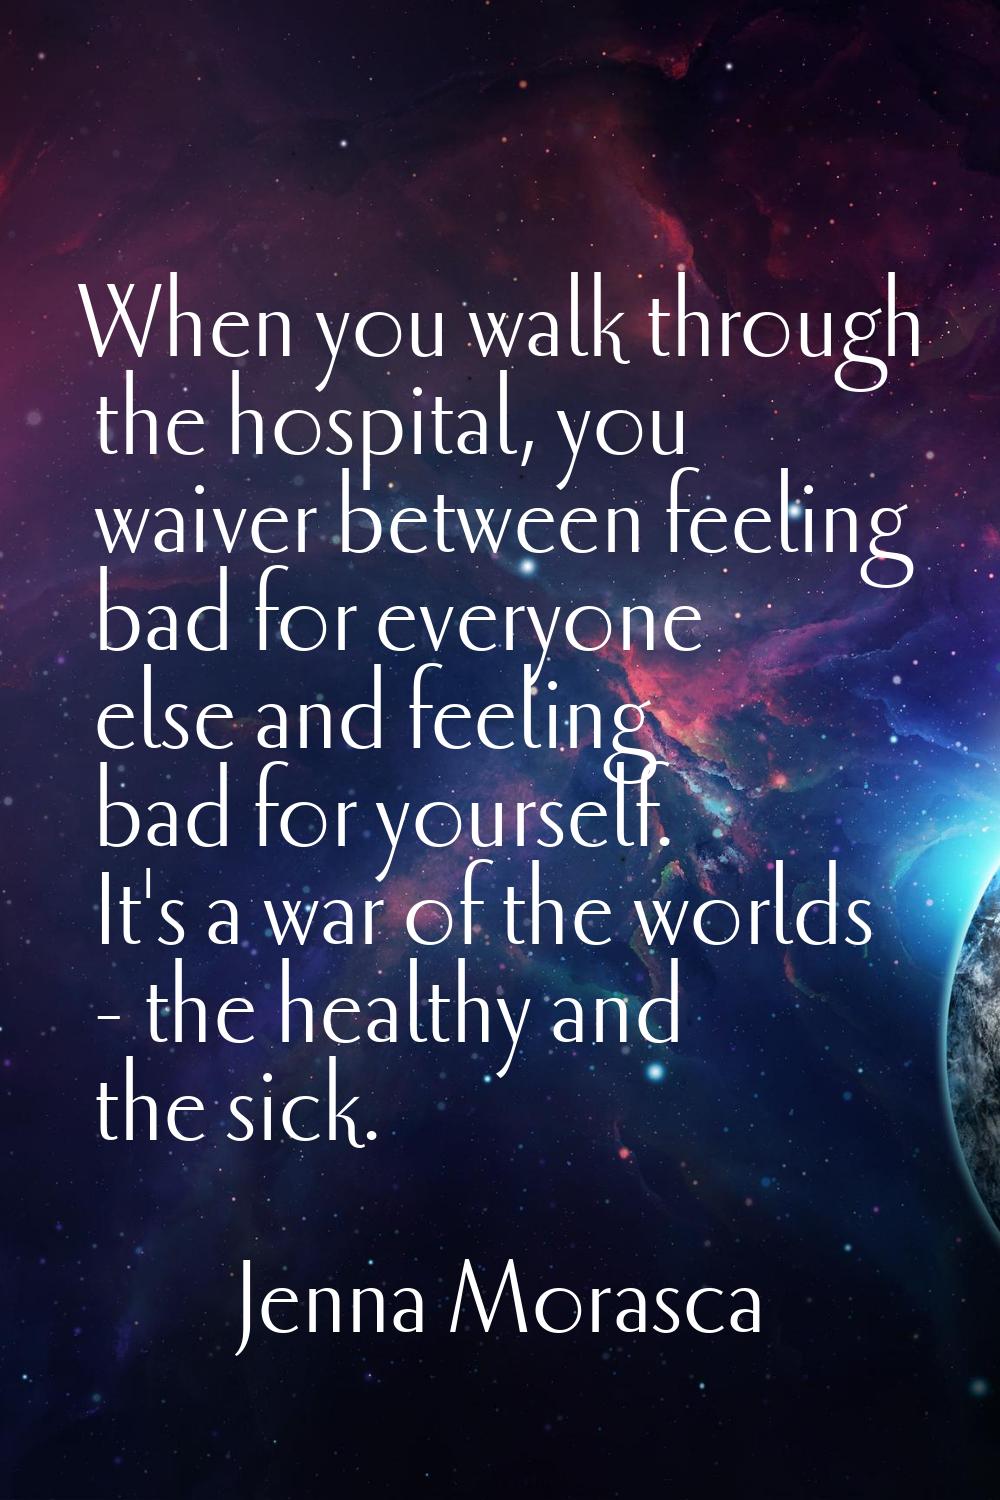 When you walk through the hospital, you waiver between feeling bad for everyone else and feeling ba